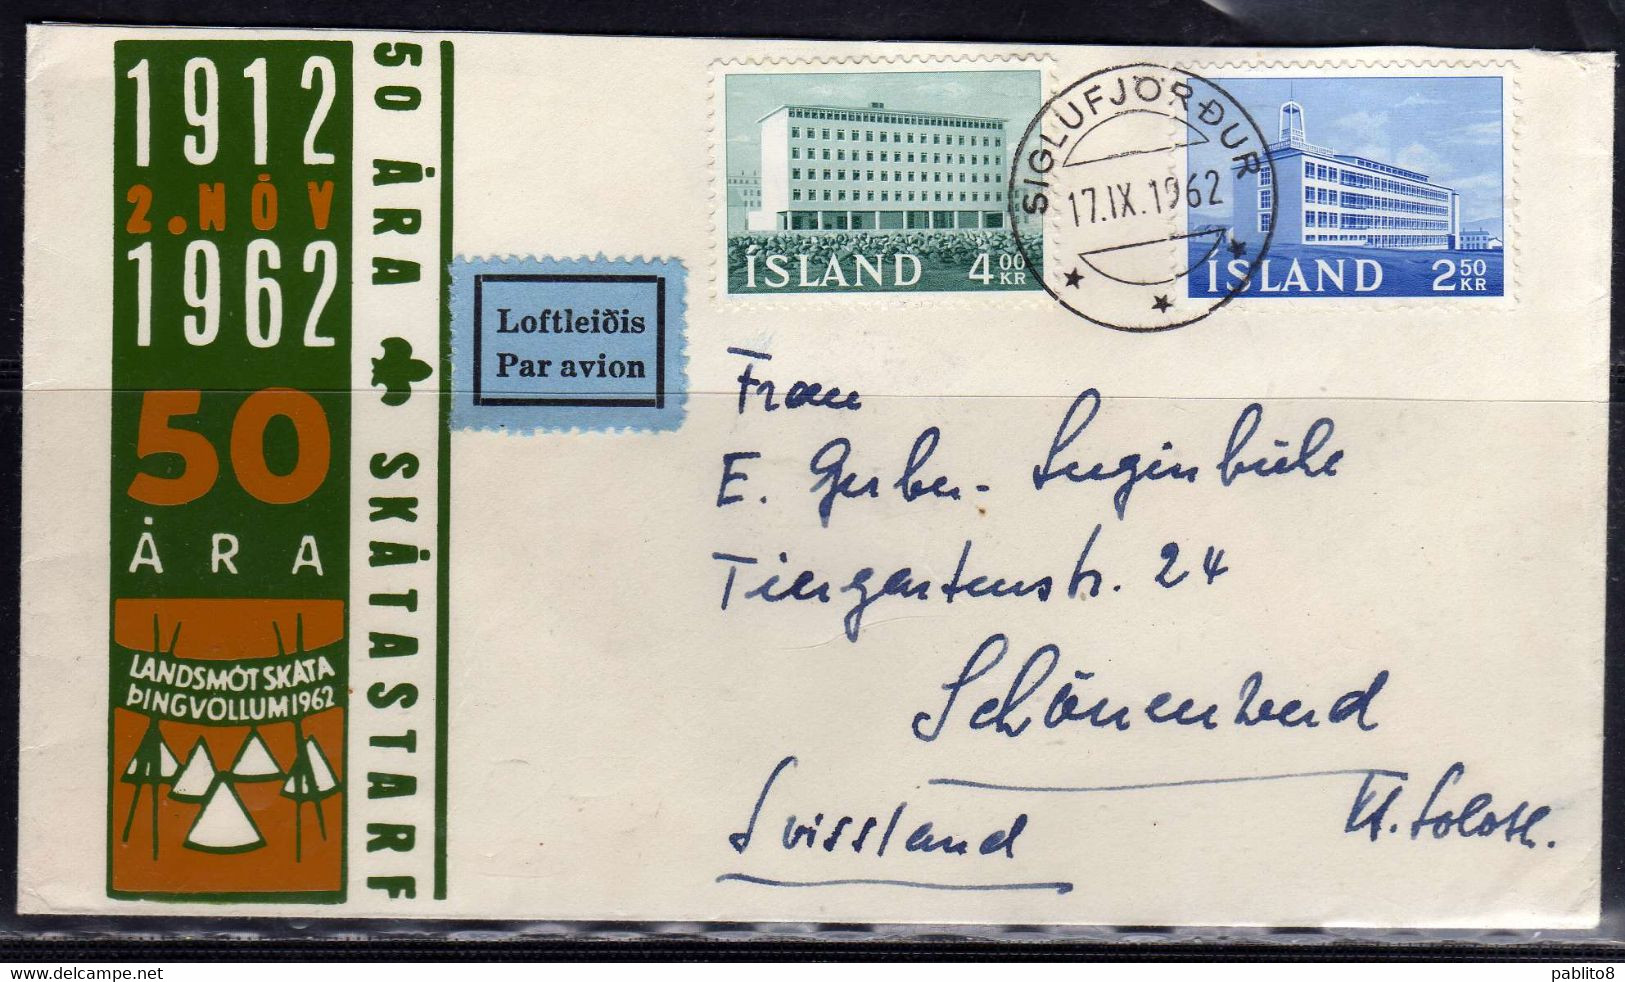 ISLANDA ICELAND ISLANDE 1962 NEW BUILDINGS PRODUCTION INSTITUTE FISHING REASEARCH 2.50 + 4k PAR AVION AIR MAIL COVER - Lettres & Documents